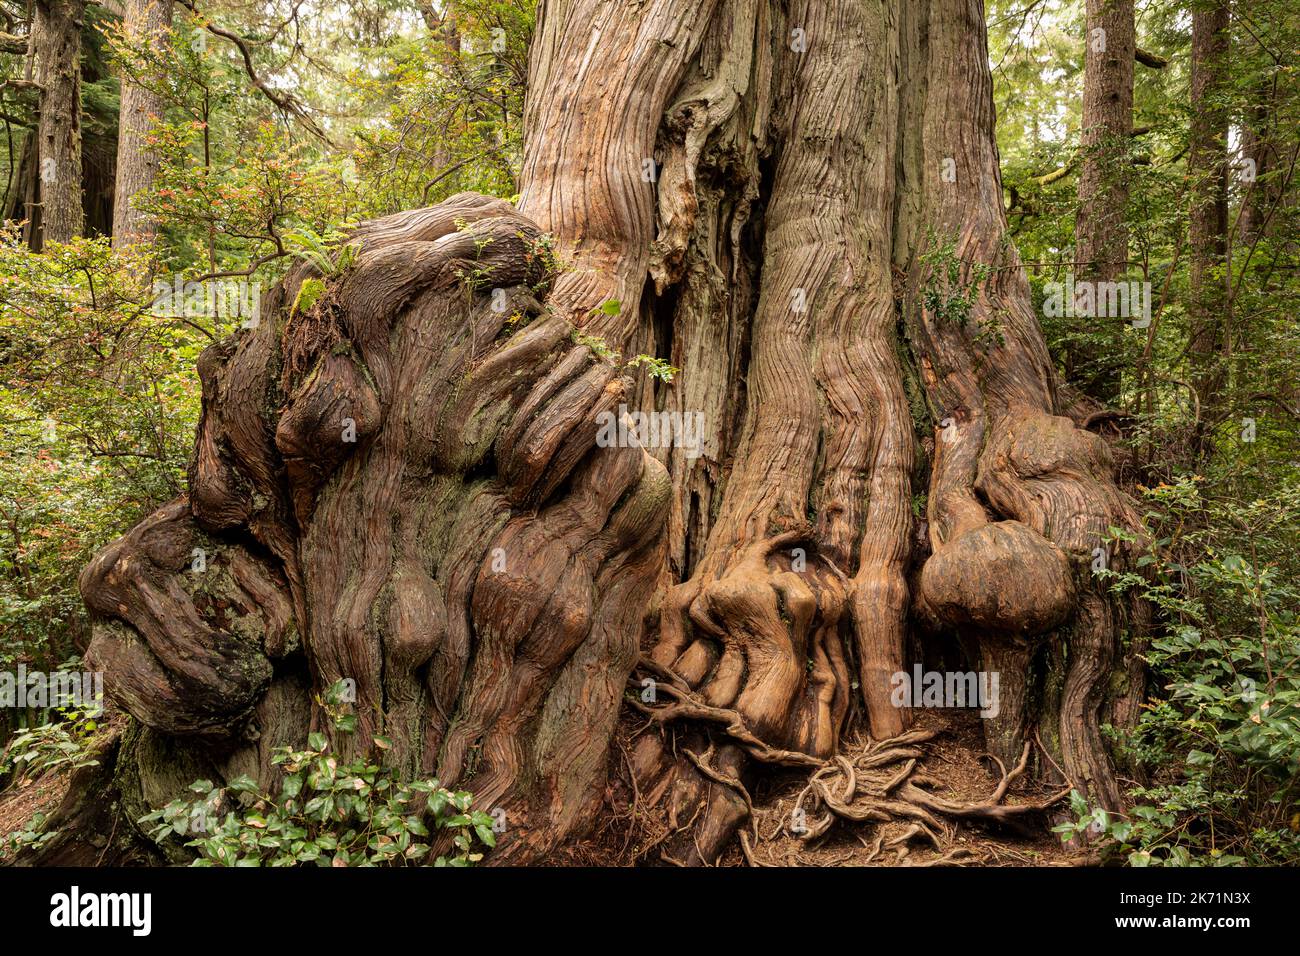 WA22290-00...WASHINGTON - Massive base of a venerable Western Red Cedar tree viewed on the Big Cedar Nature Trail in Olympic National Park. Stock Photo